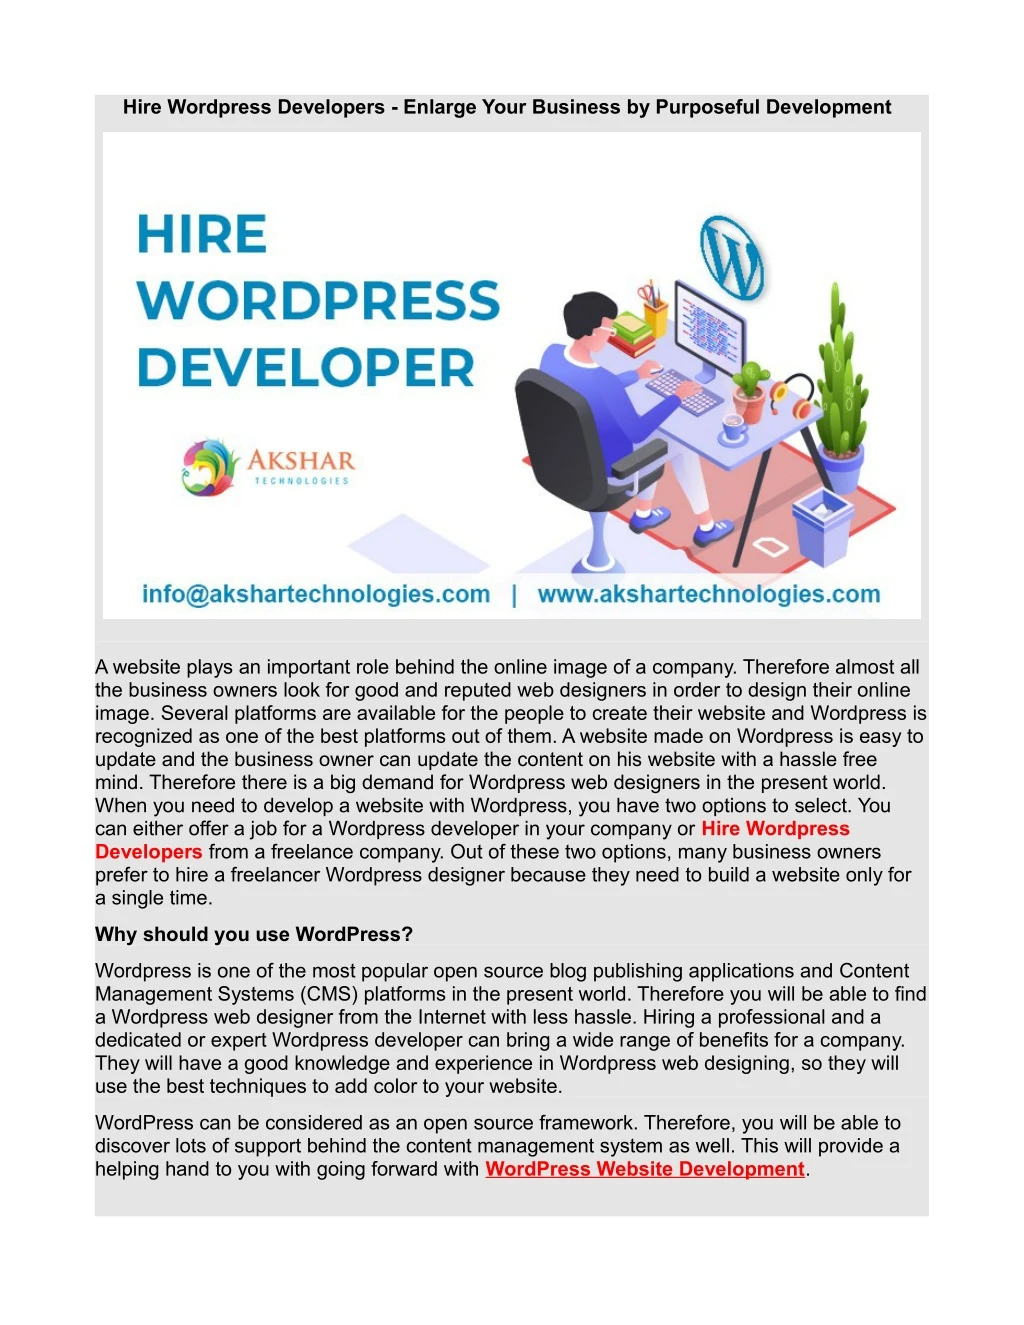 hire wordpress developers enlarge your business